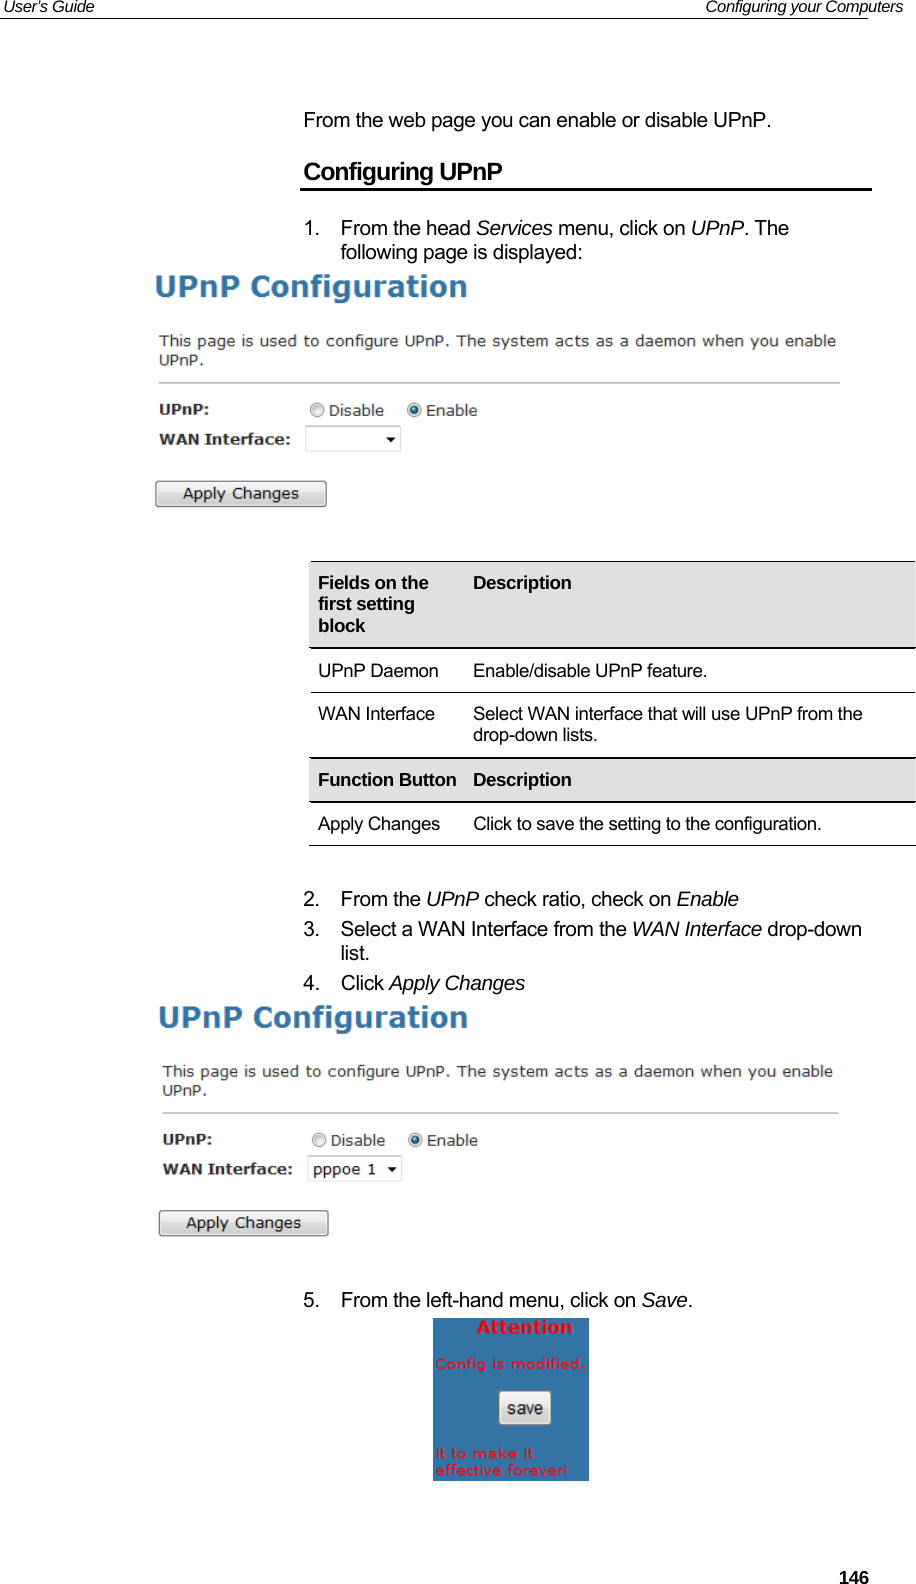 User’s Guide   Configuring your Computers  From the web page you can enable or disable UPnP. Configuring UPnP 1. From the head Services menu, click on UPnP. The following page is displayed:      Fields on the first setting block Description  UPnP Daemon  Enable/disable UPnP feature. WAN Interface  Select WAN interface that will use UPnP from the drop-down lists.     Function Button Description  Apply Changes  Click to save the setting to the configuration.  2. From the UPnP check ratio, check on Enable 3.  Select a WAN Interface from the WAN Interface drop-down list. 4. Click Apply Changes    5.  From the left-hand menu, click on Save.    146